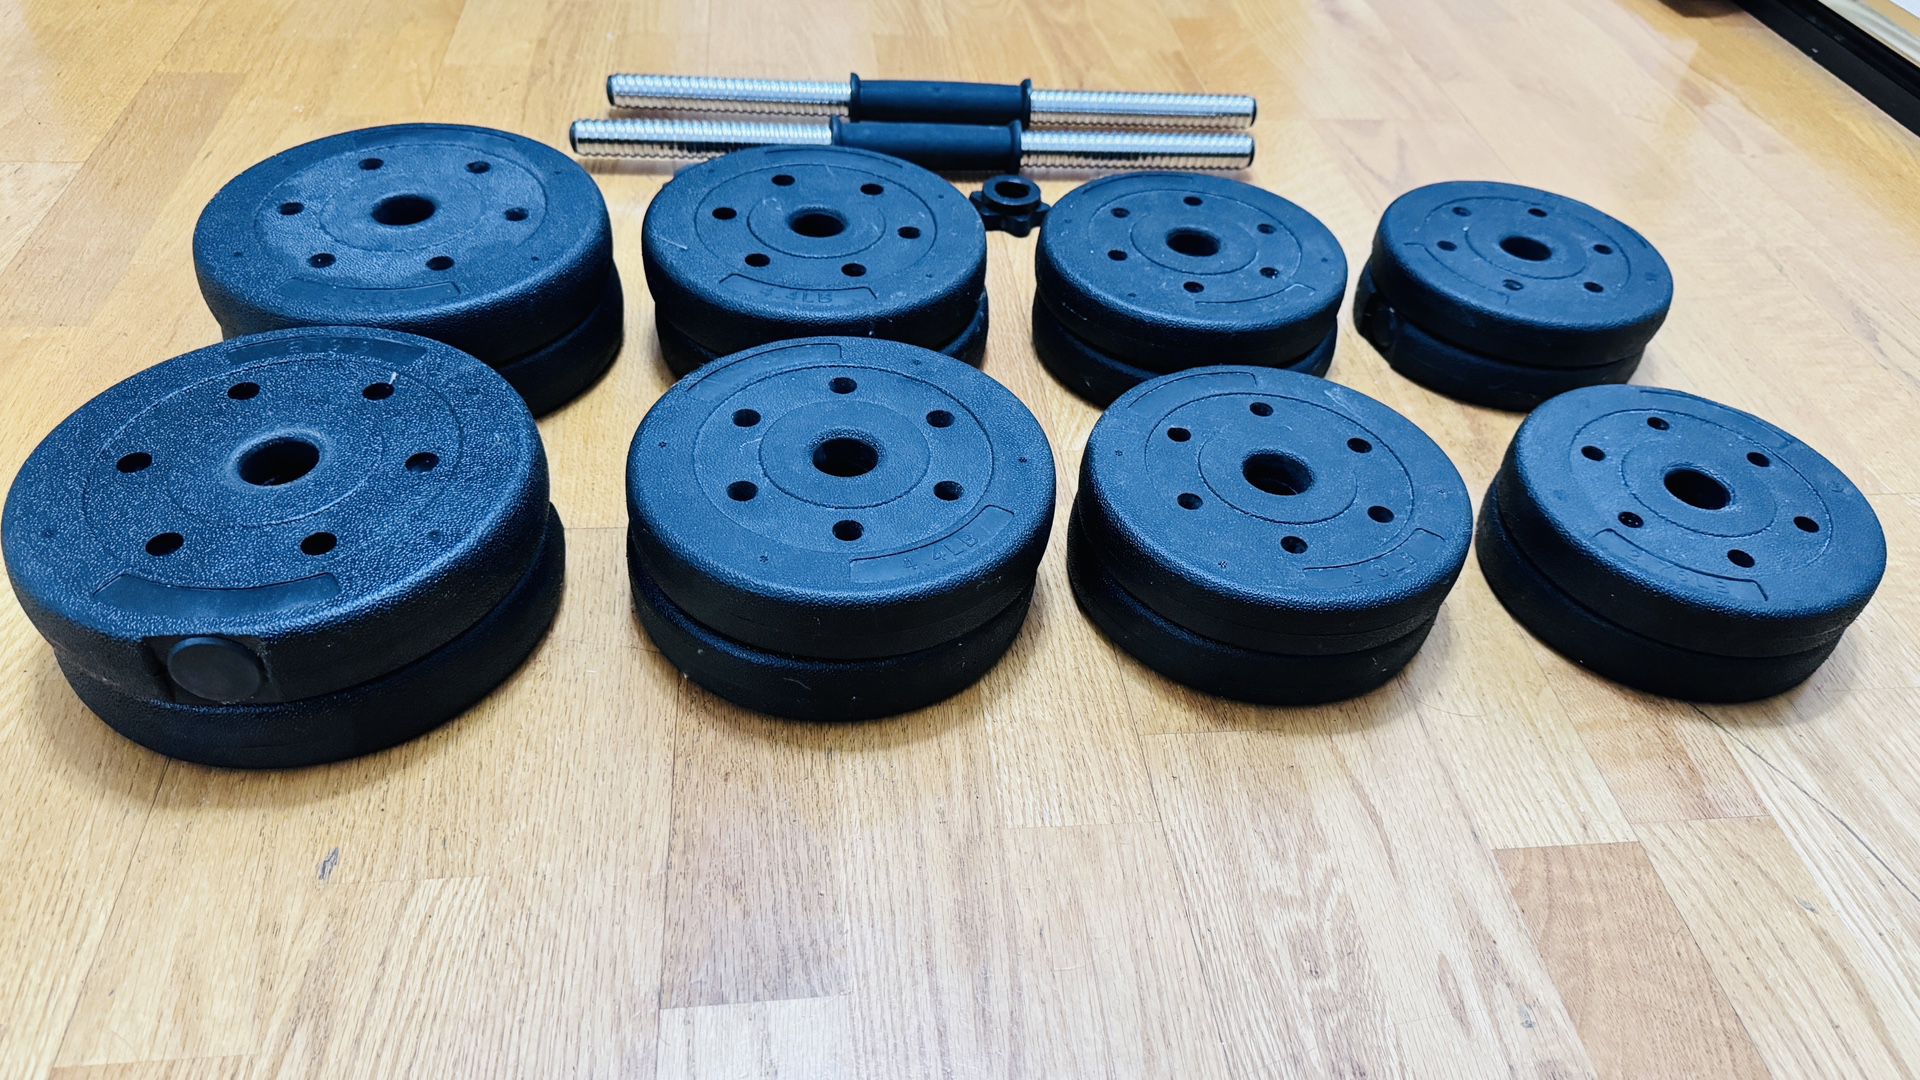 Unused And New Dumbbells Set For Sale